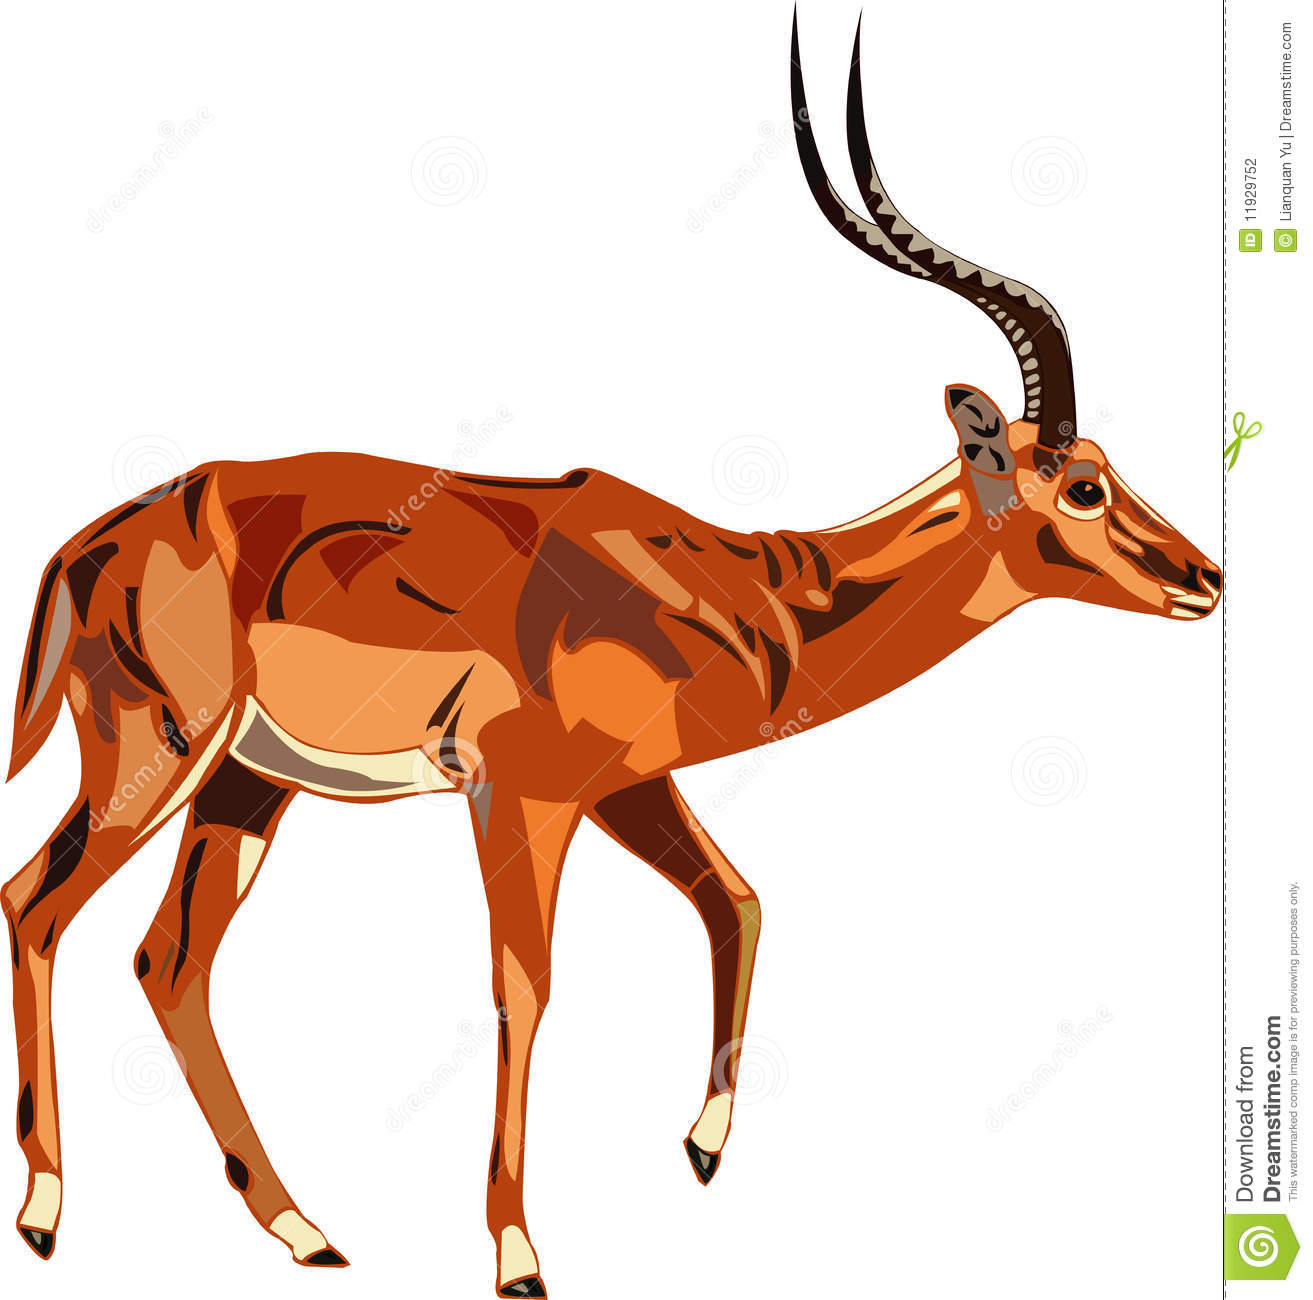 Impala clipart #14, Download drawings